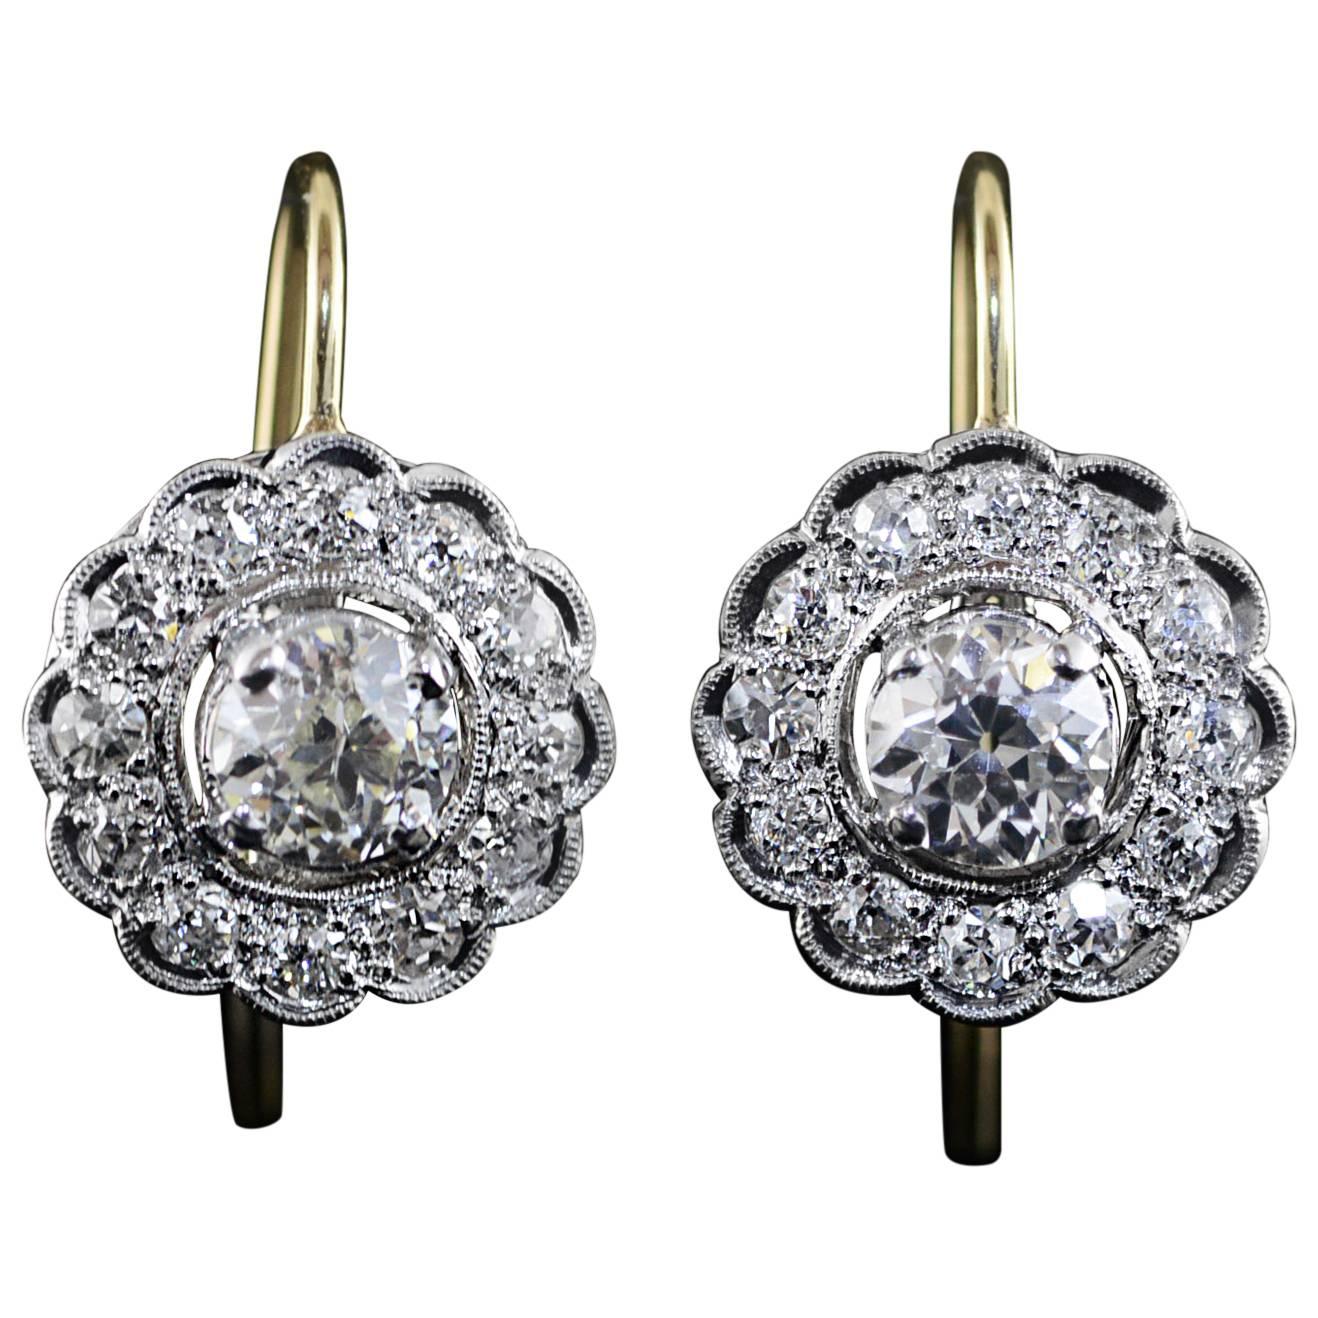 1.92 Carat Total Weight Victorian Diamond Earrings For Sale